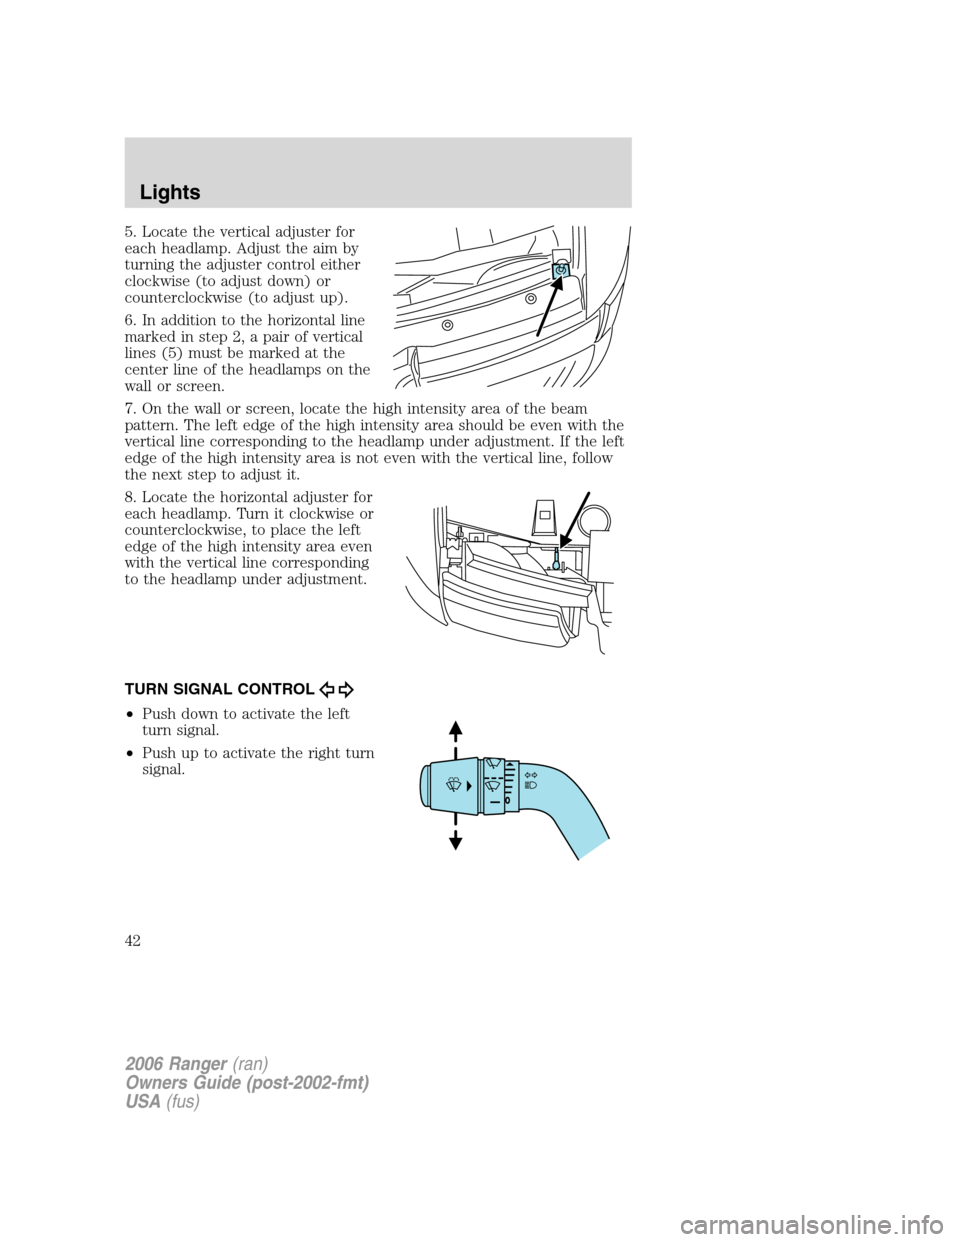 FORD RANGER 2006 2.G Owners Manual 5. Locate the vertical adjuster for
each headlamp. Adjust the aim by
turning the adjuster control either
clockwise (to adjust down) or
counterclockwise (to adjust up).
6. In addition to the horizontal